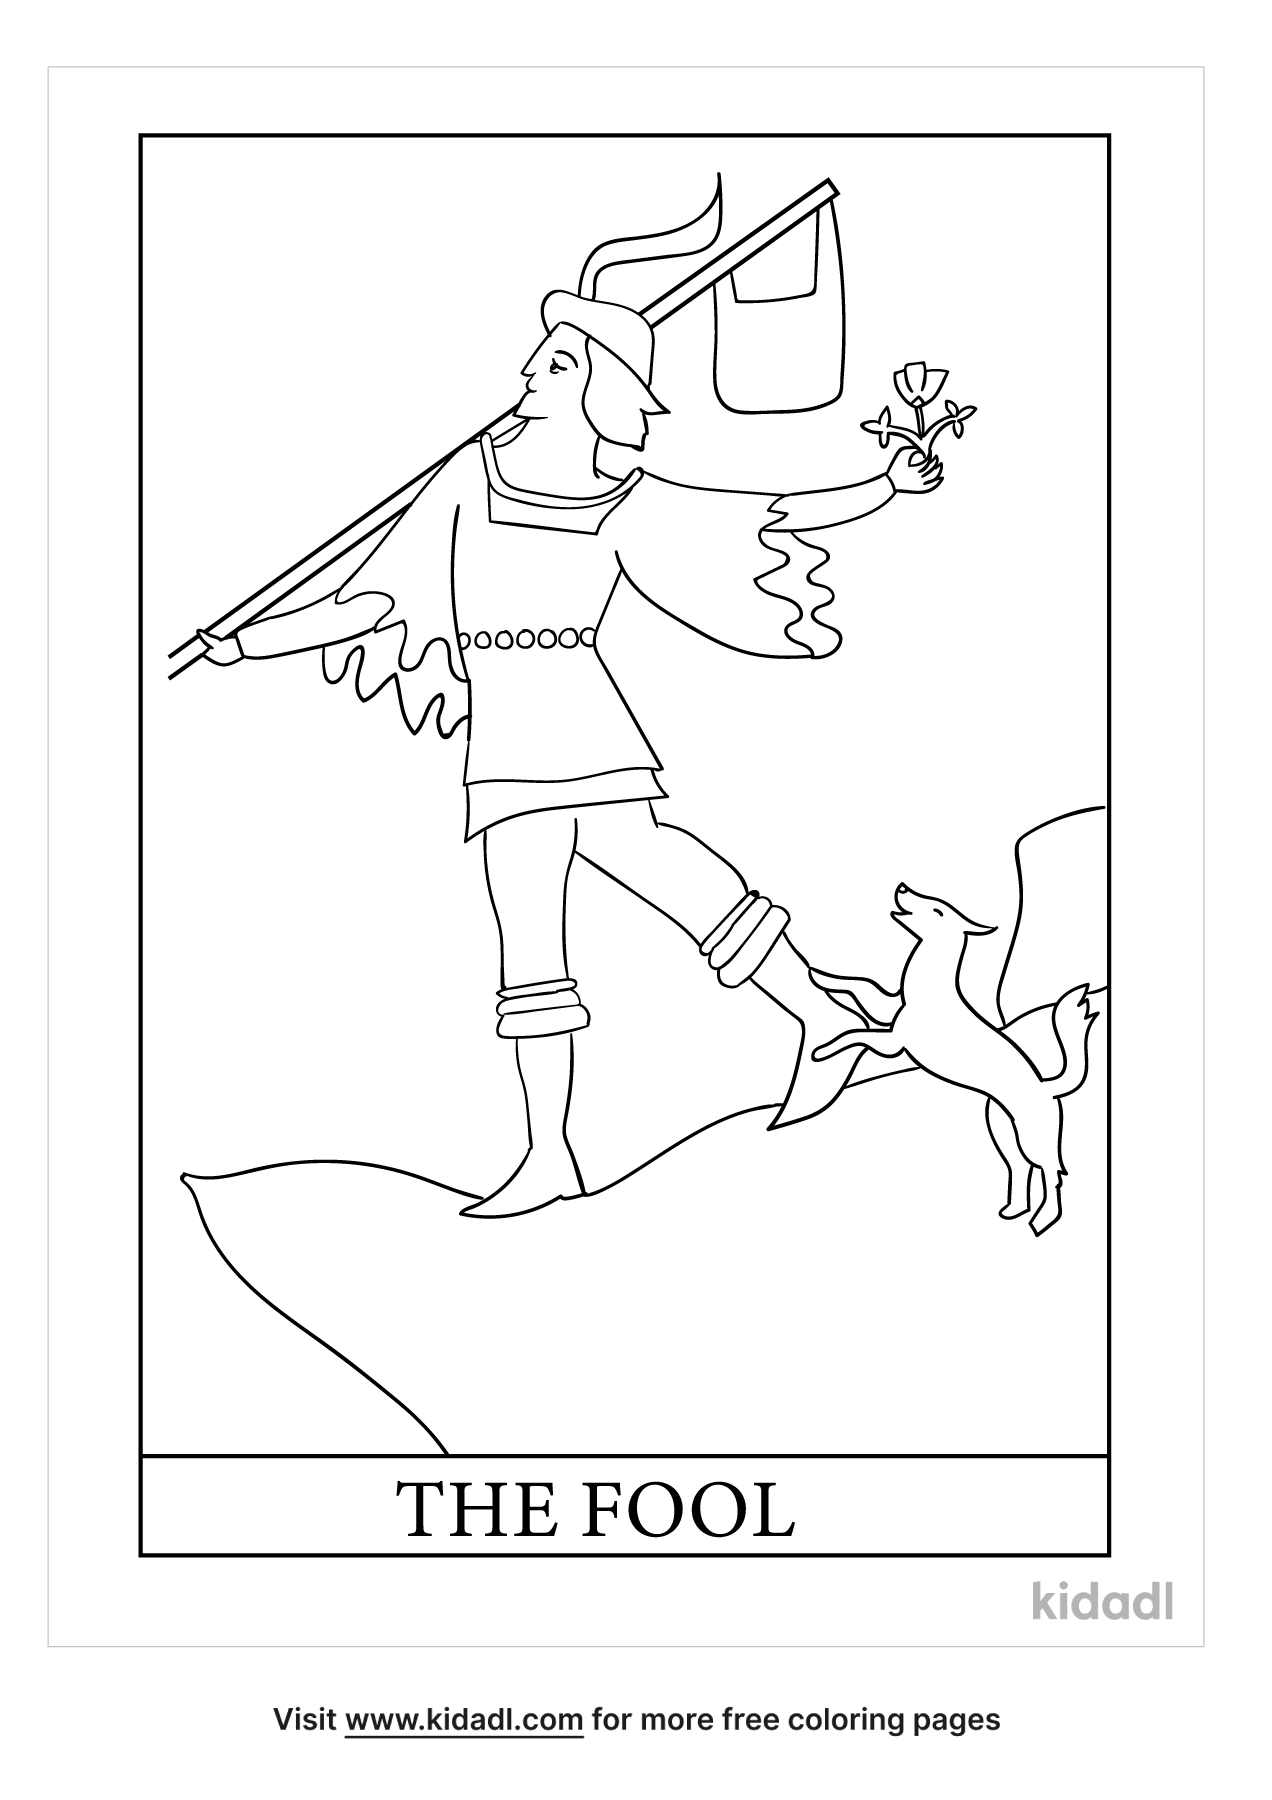 Fool Tarot Coloring Pages | Free Fairytales & Stories Coloring Pages |  Kidadl